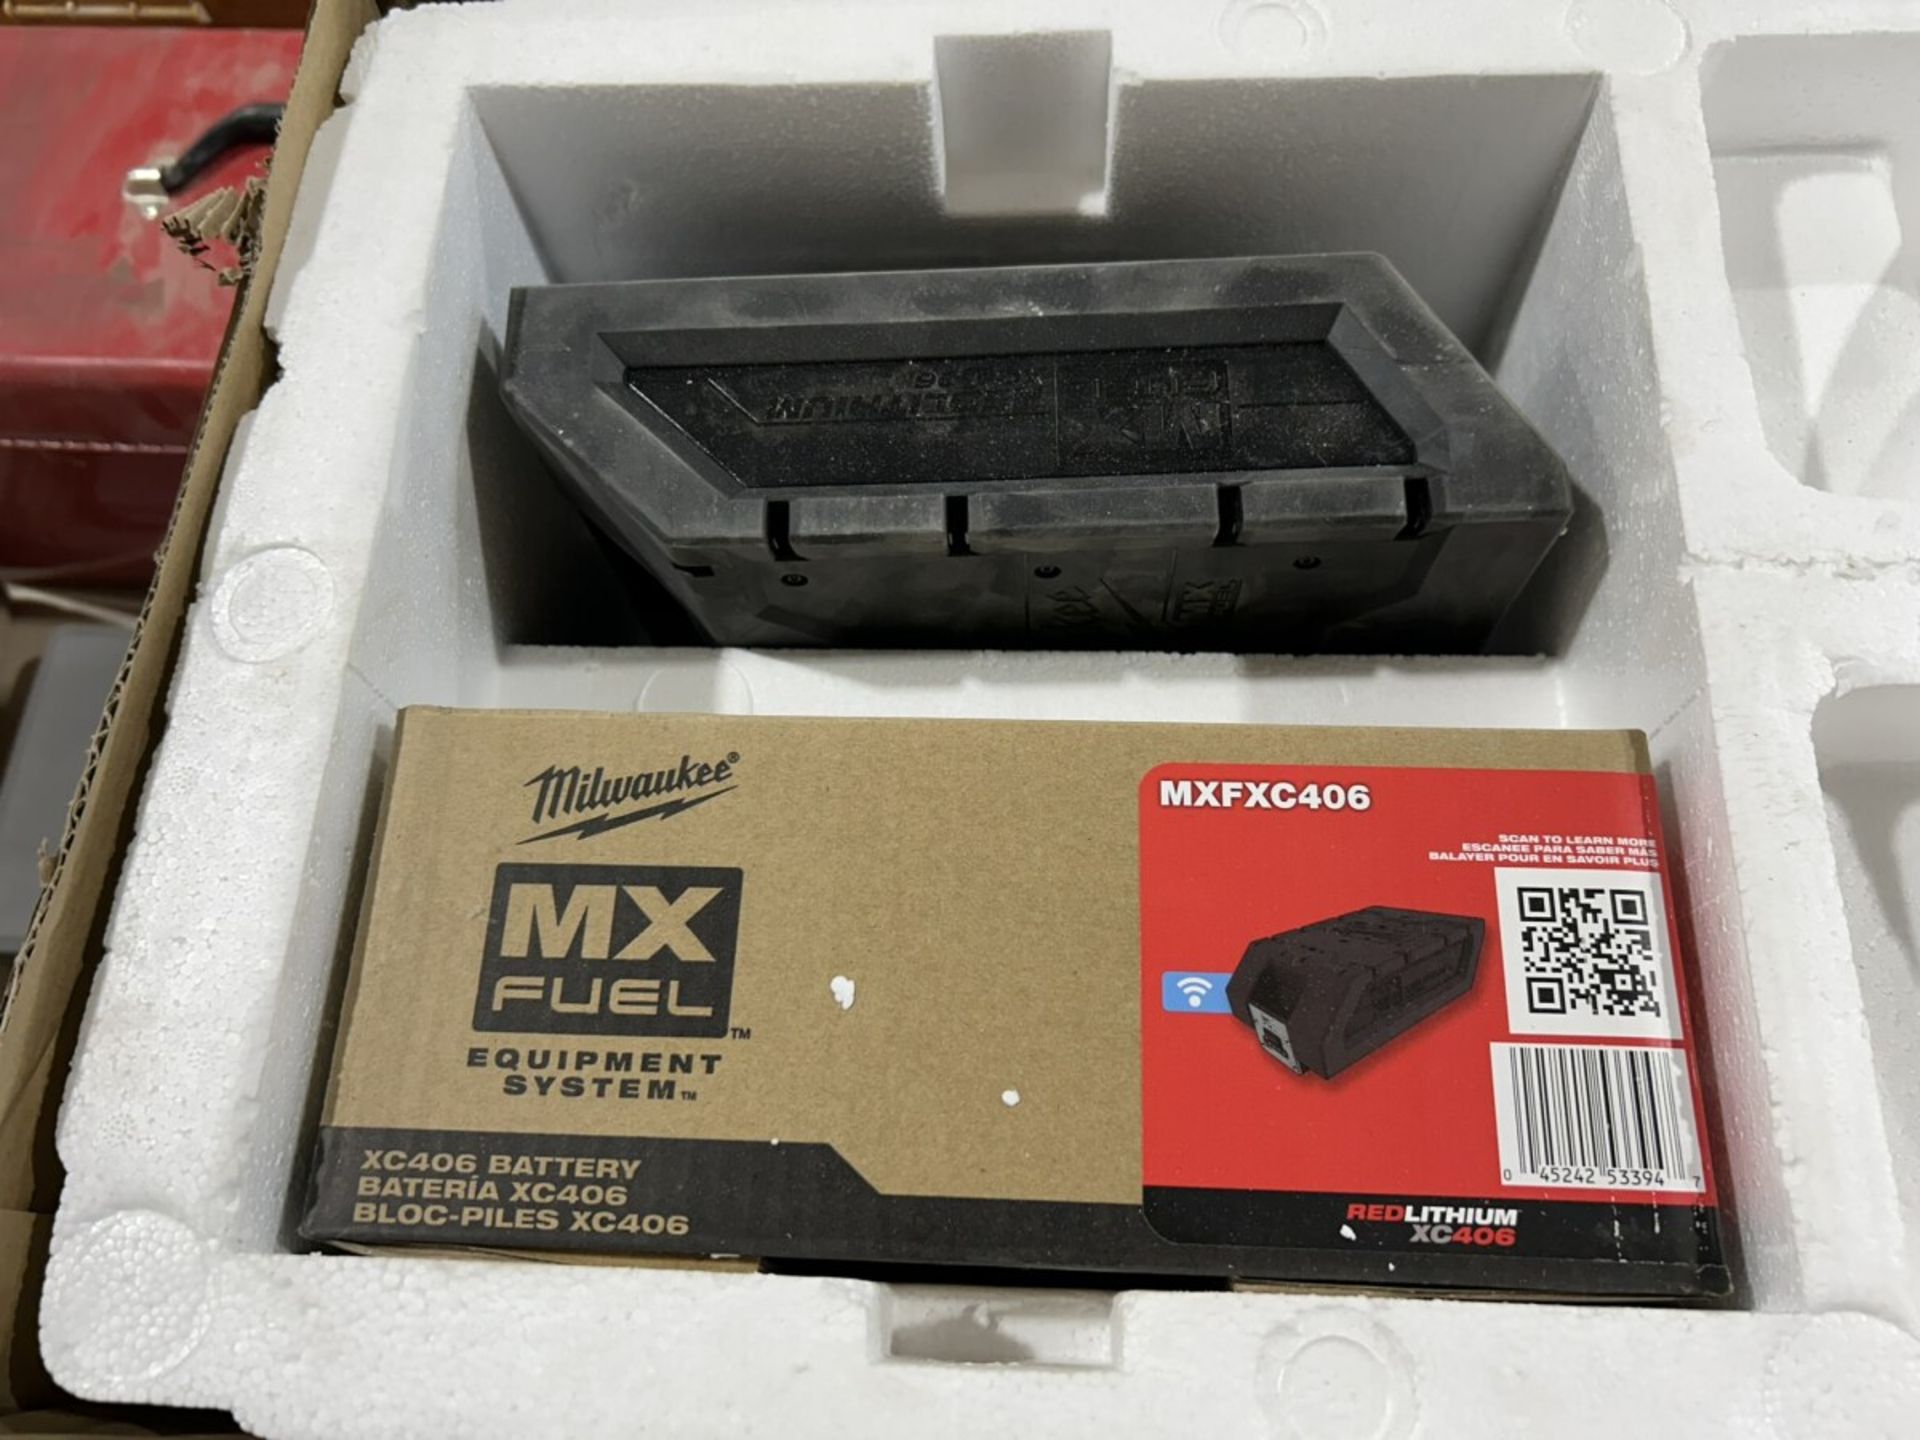 MILWAUKEE MXF314-2XC CORDLESS 14" DEMOLITION SAW W/ 2 XC406 BATTERIES AND CHARGER (NEW IN BOX) - Image 4 of 8